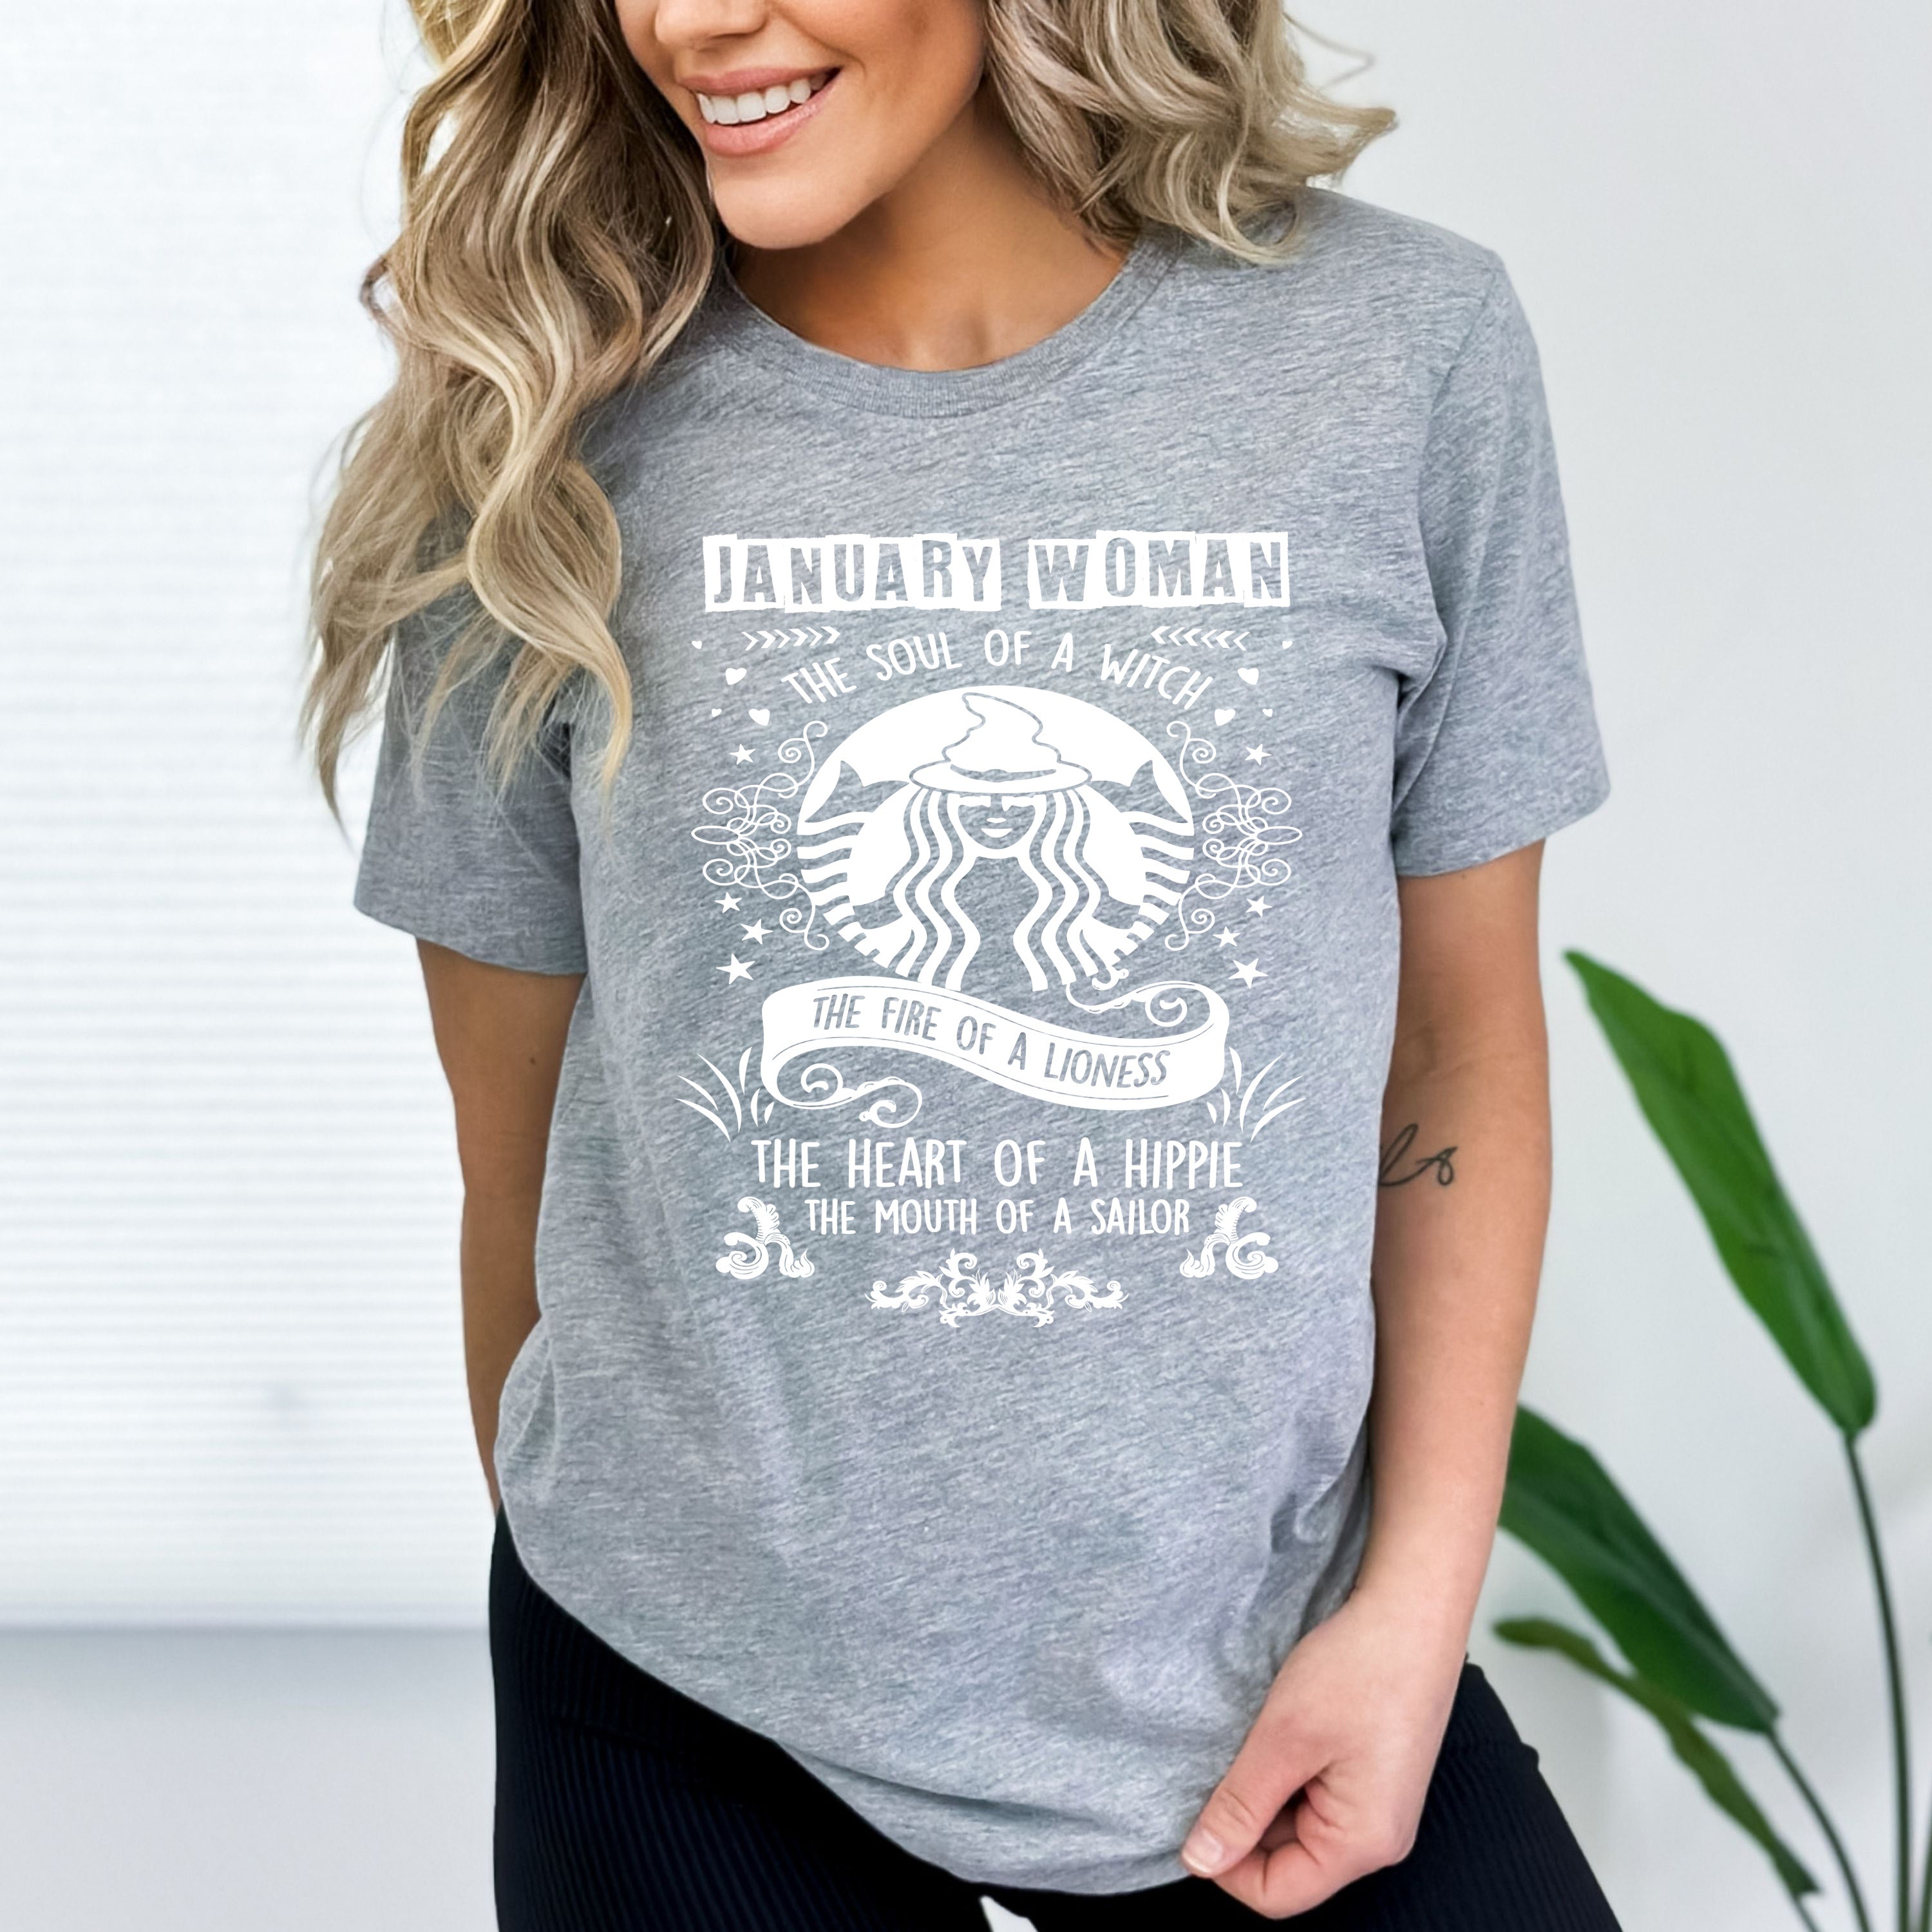 "JANUARY WOMAN The Soul Of A Witch The Fire Of A Lioness The Heart Of A Hippie...",T-Shirt.